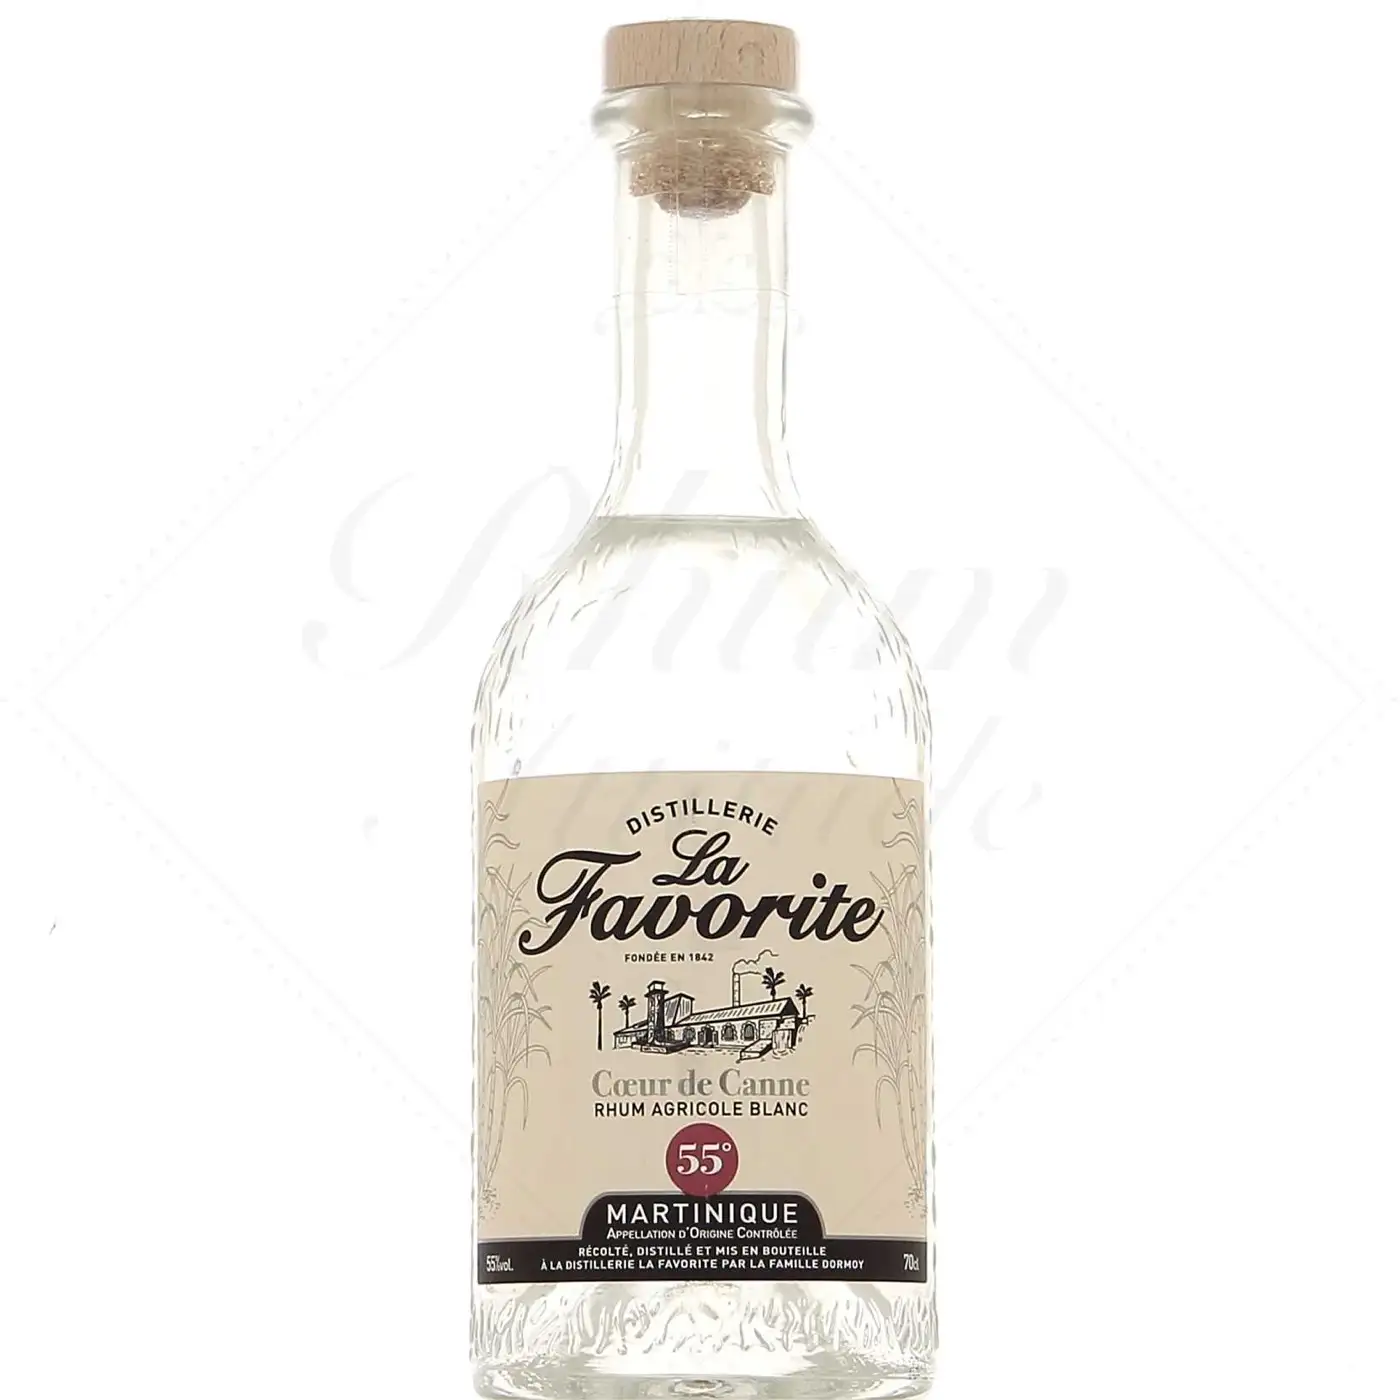 Image of the front of the bottle of the rum Coeur de Canne